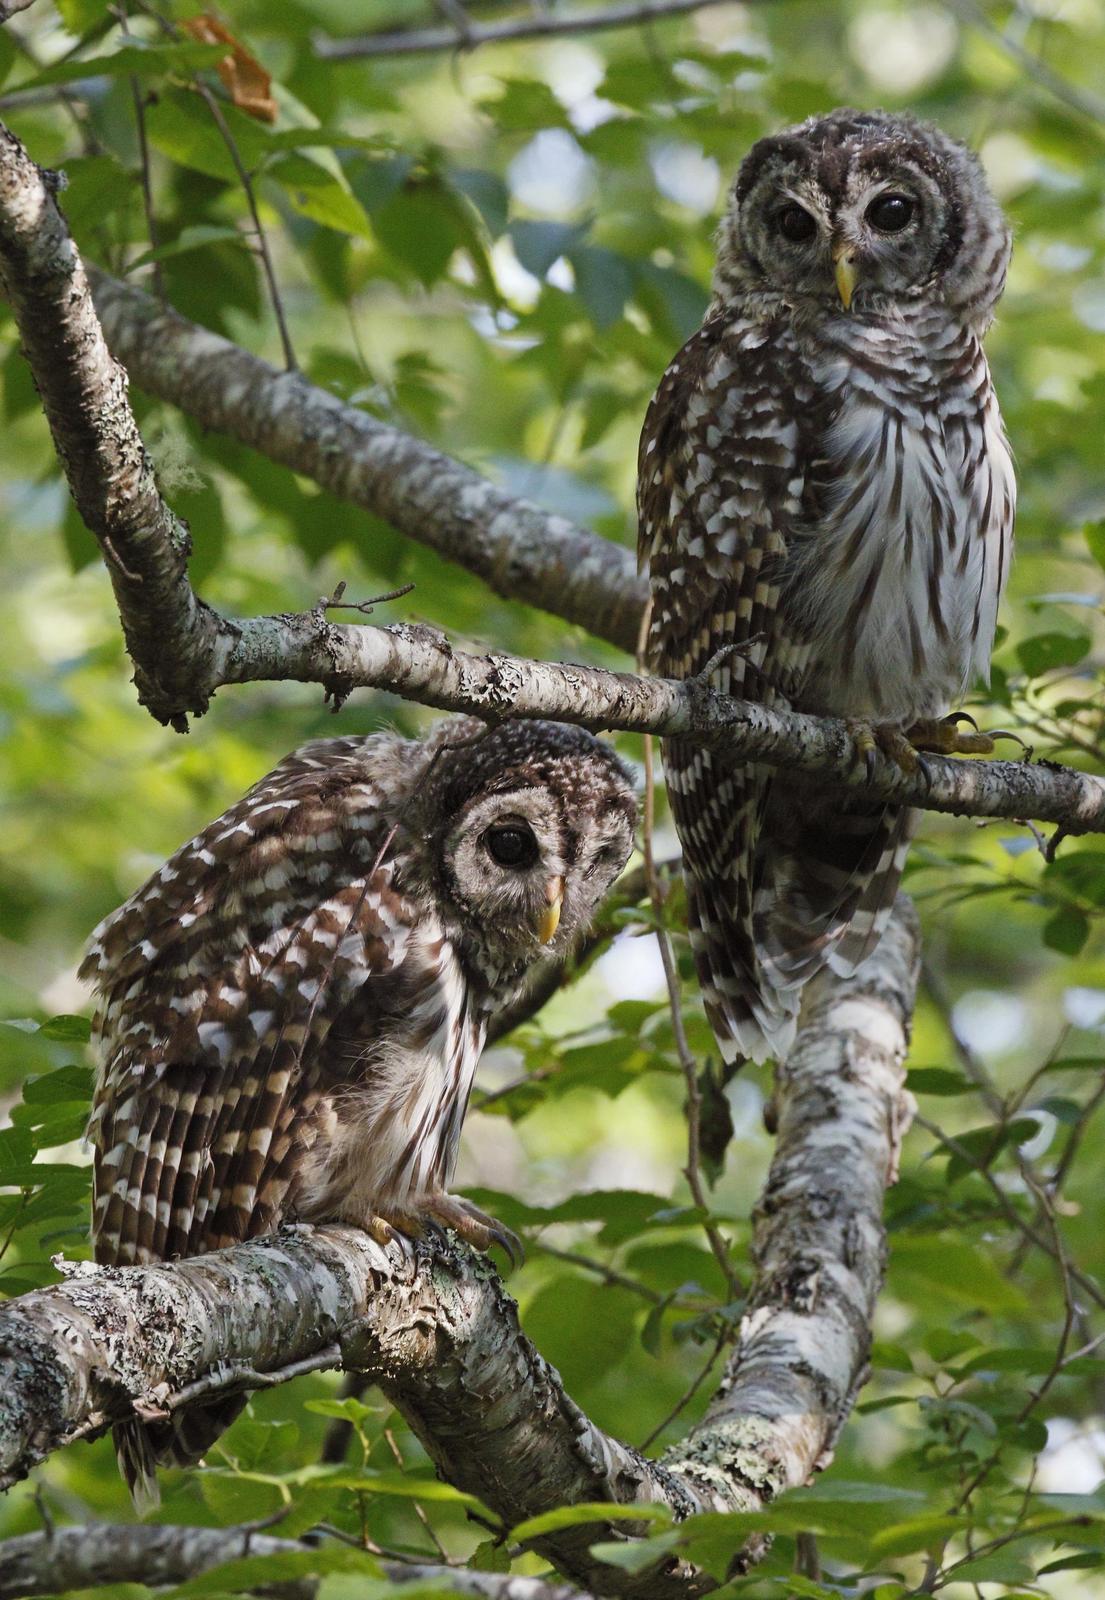 Barred Owl Photo by Emily Willoughby